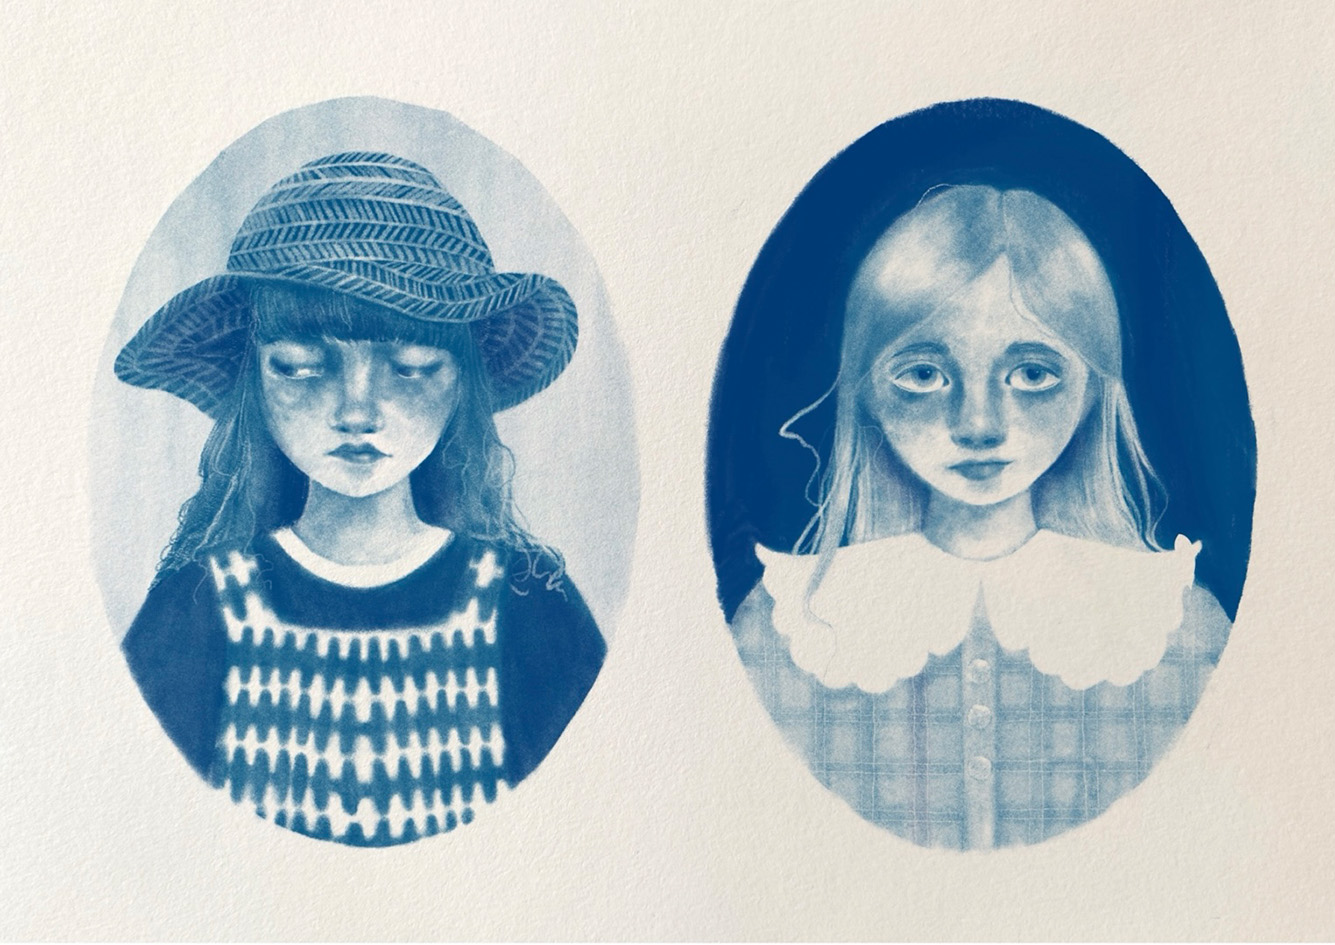 Two cameo illustrations of young girls